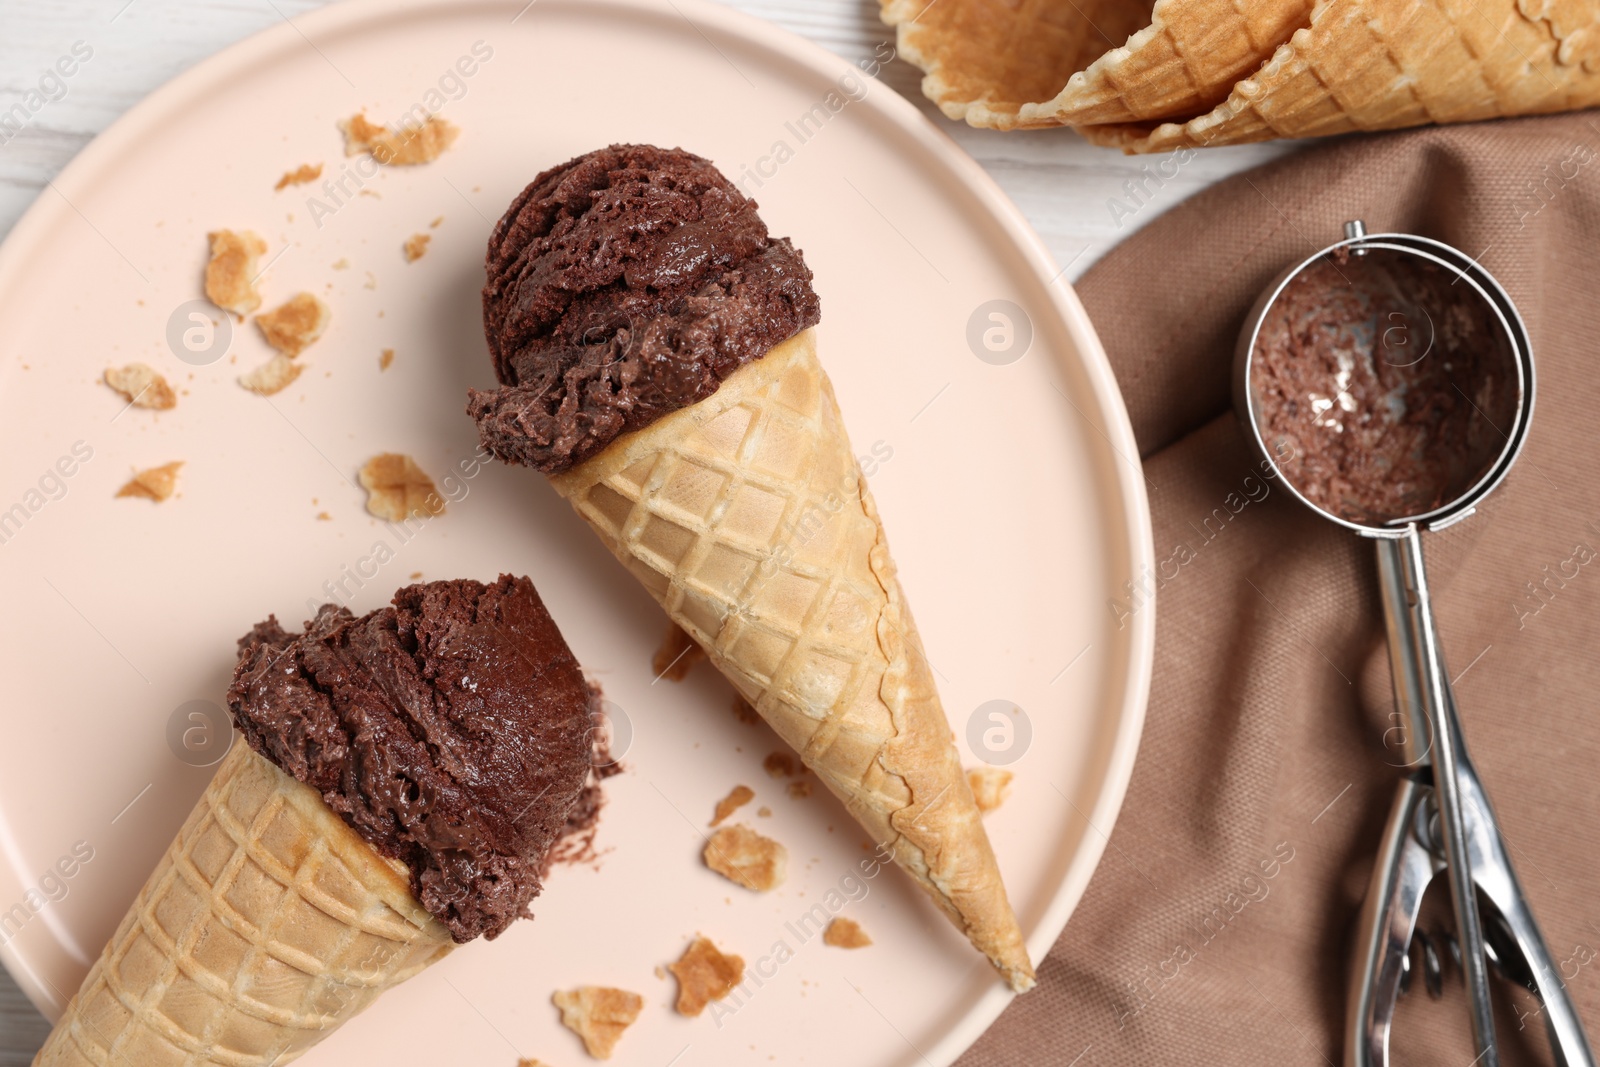 Photo of Chocolate ice cream scoops in wafer cones on table, flat lay